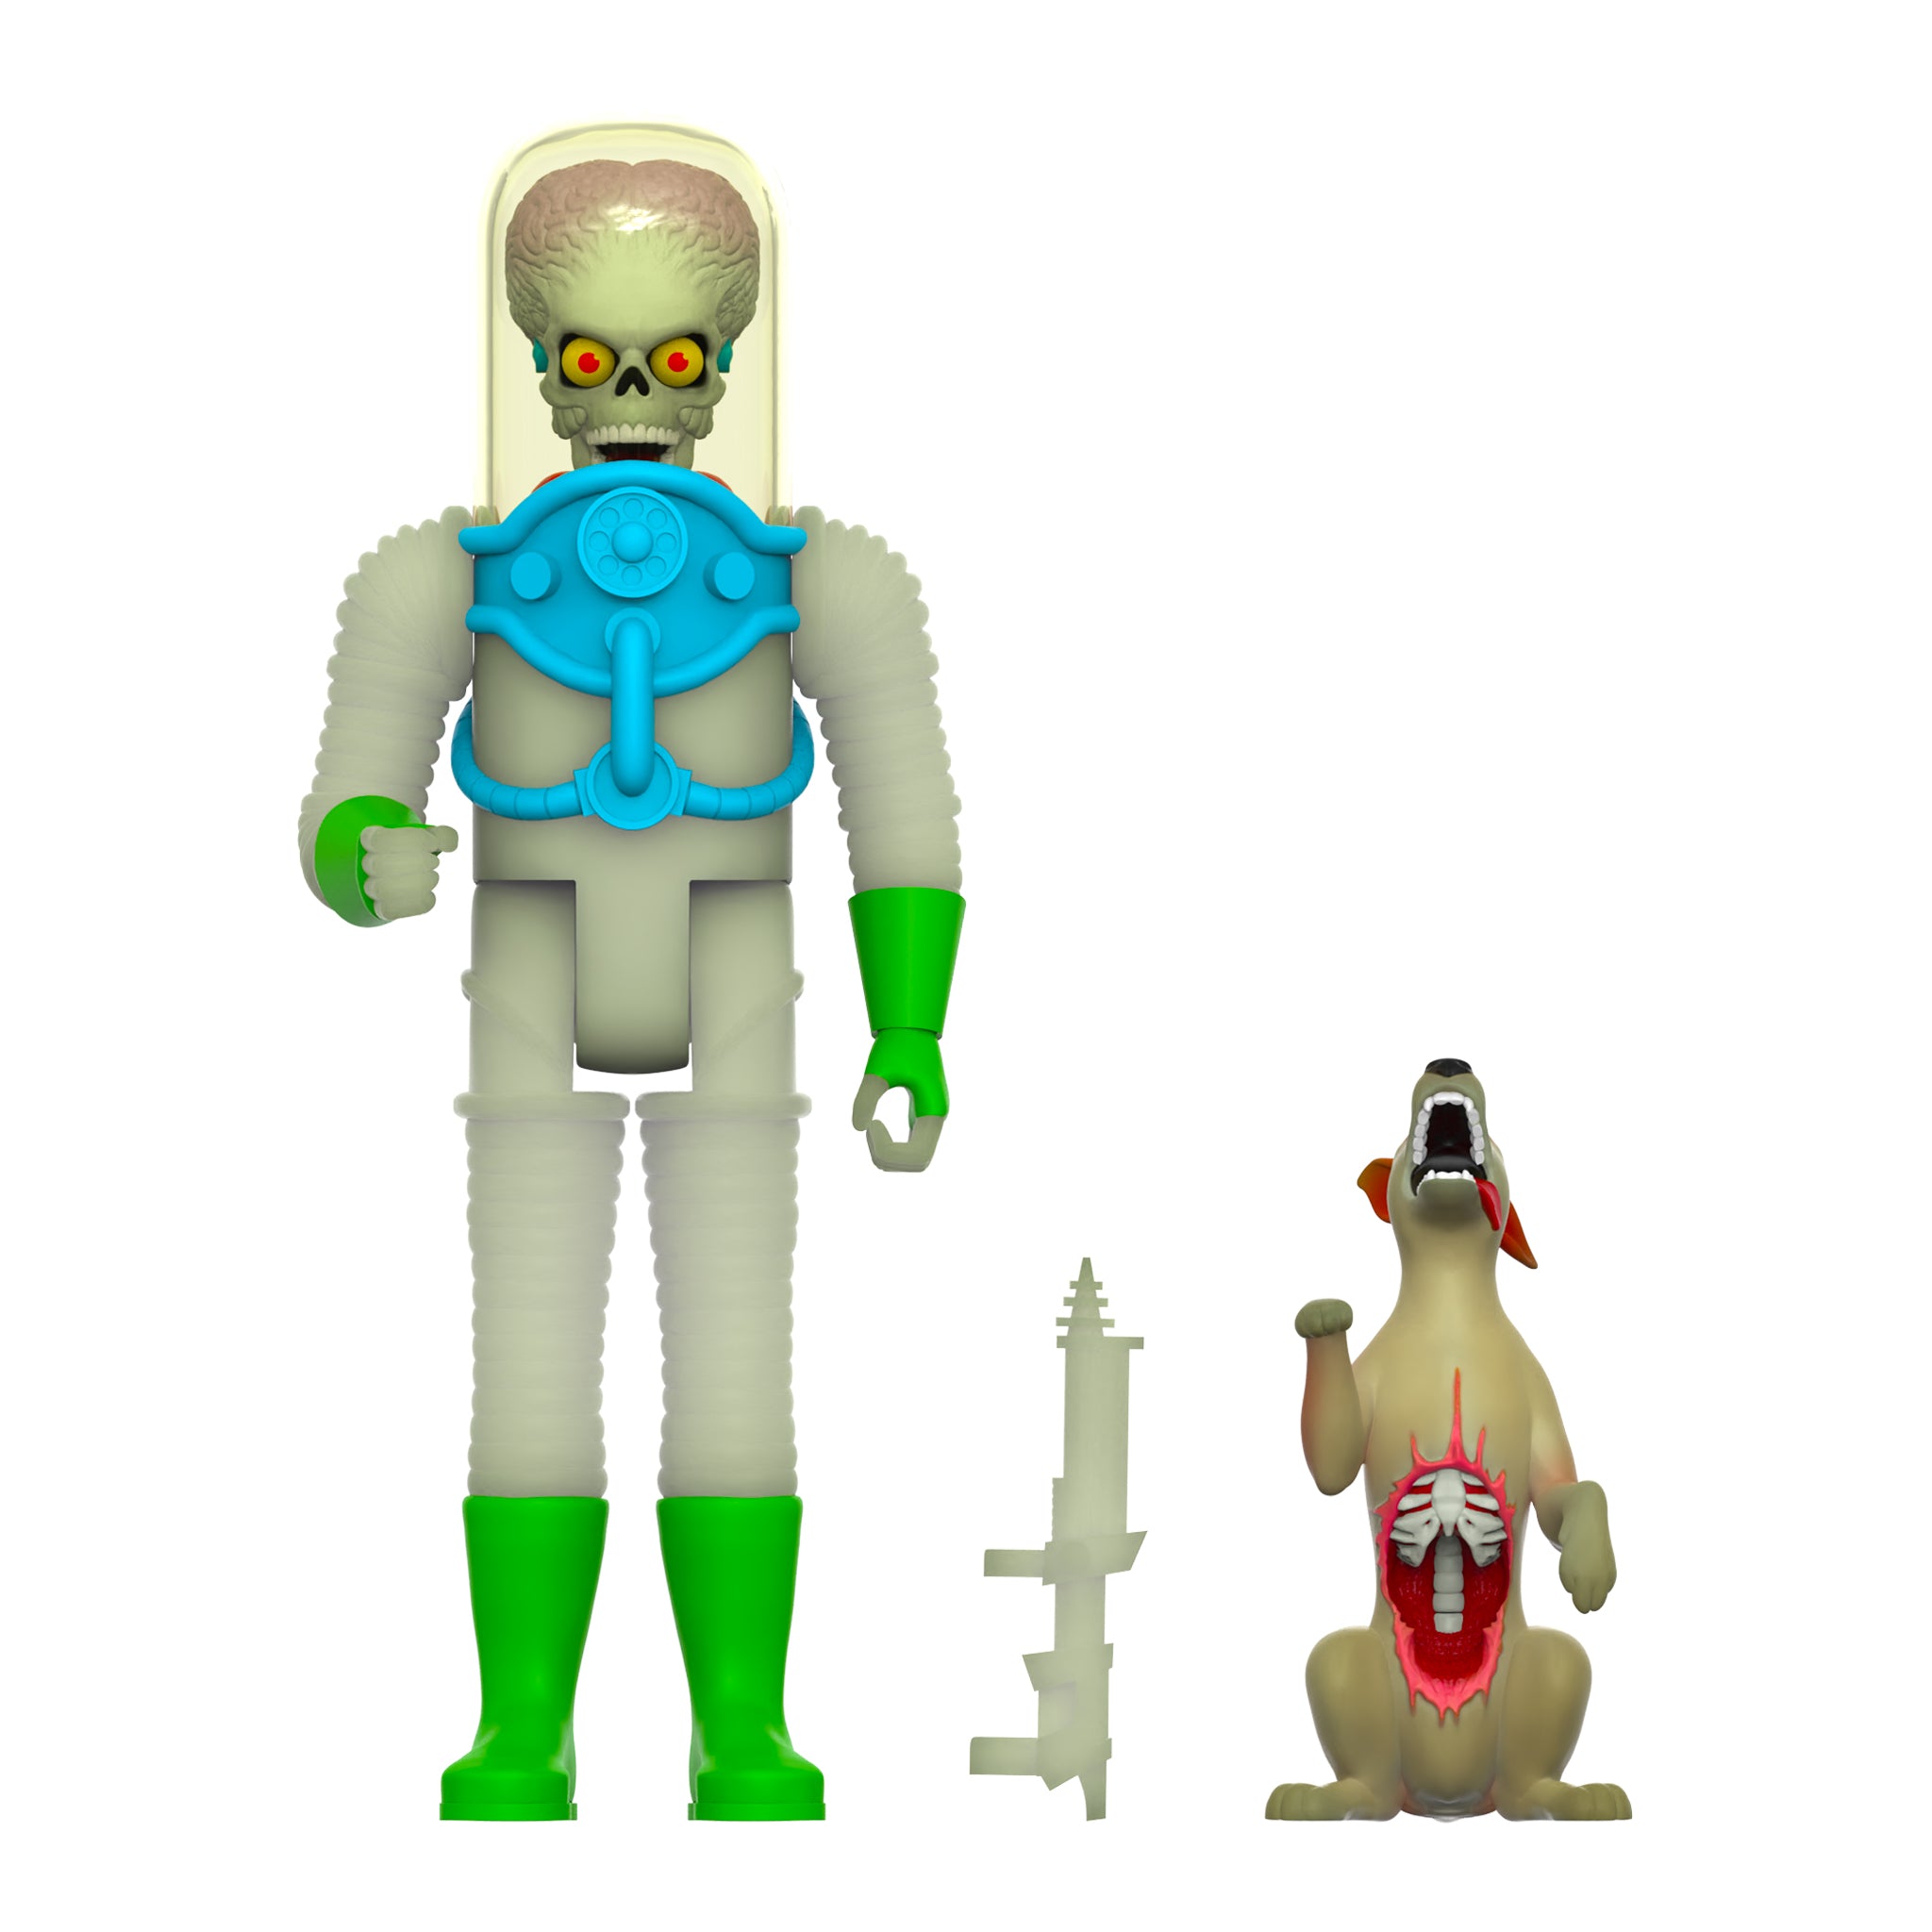 Mars Attacks ReAction Wave 2 - Destroying a Dog (Glow)